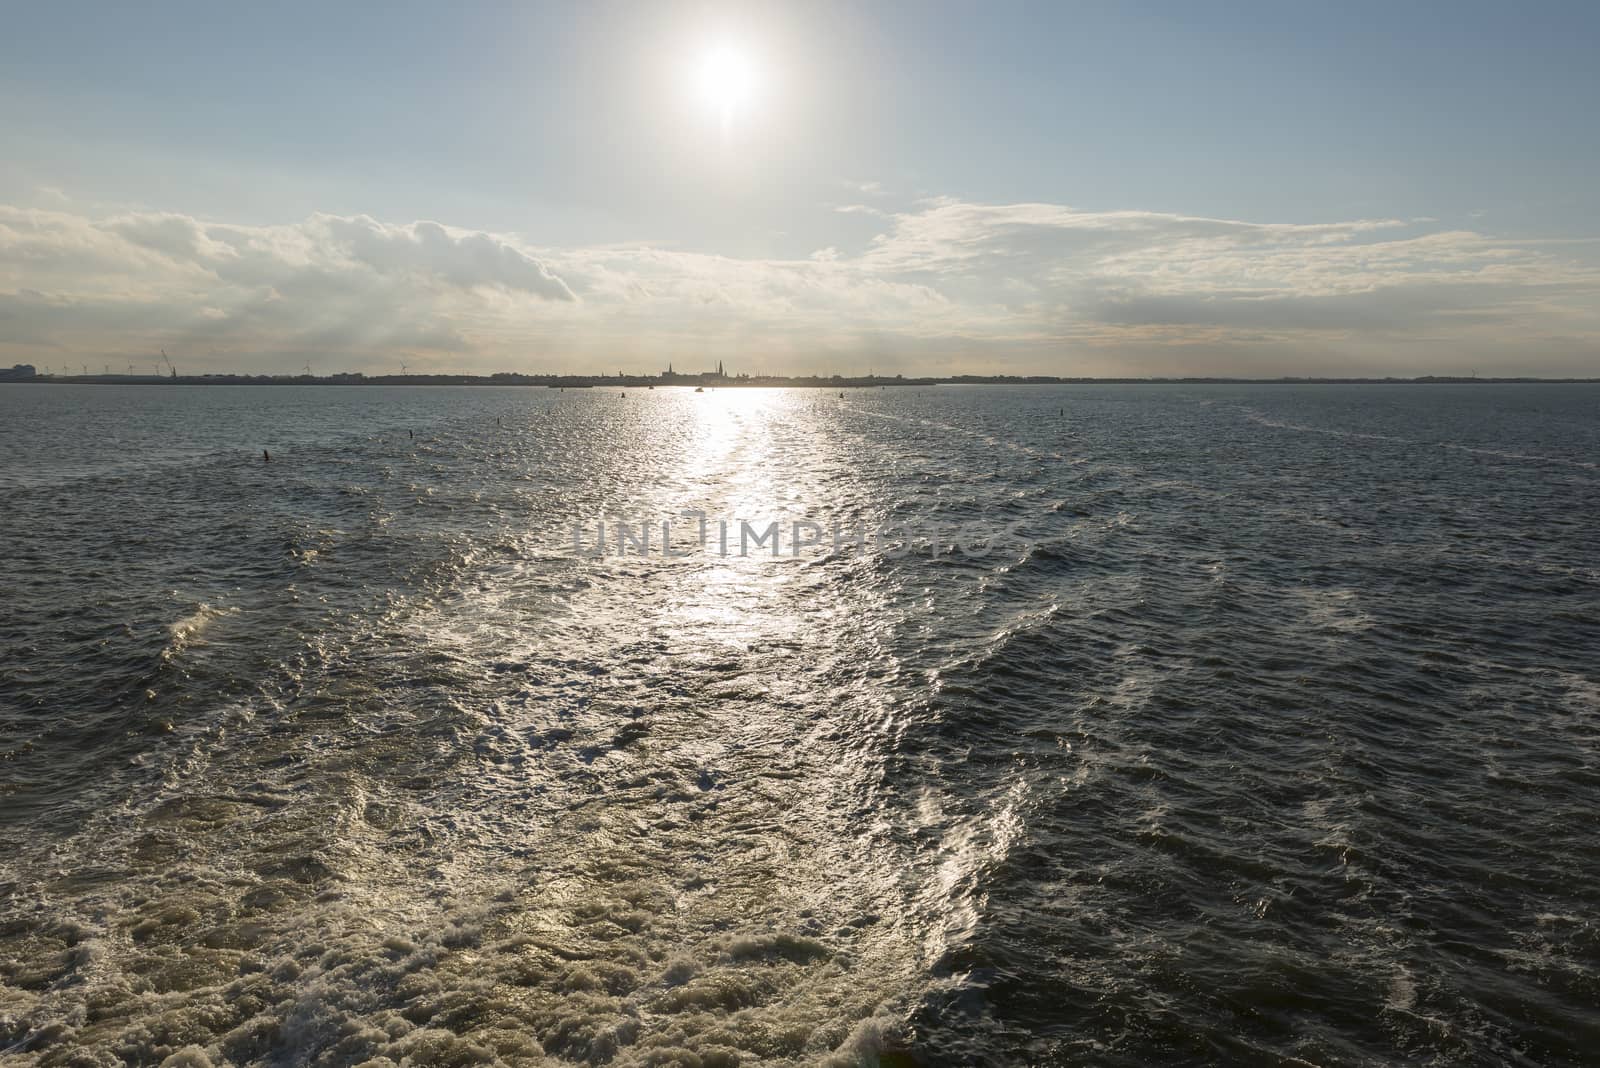 Wake behind the ferry from the Mainland to Vlieland with on the horizon the town of Harlingen in the Netherlands
